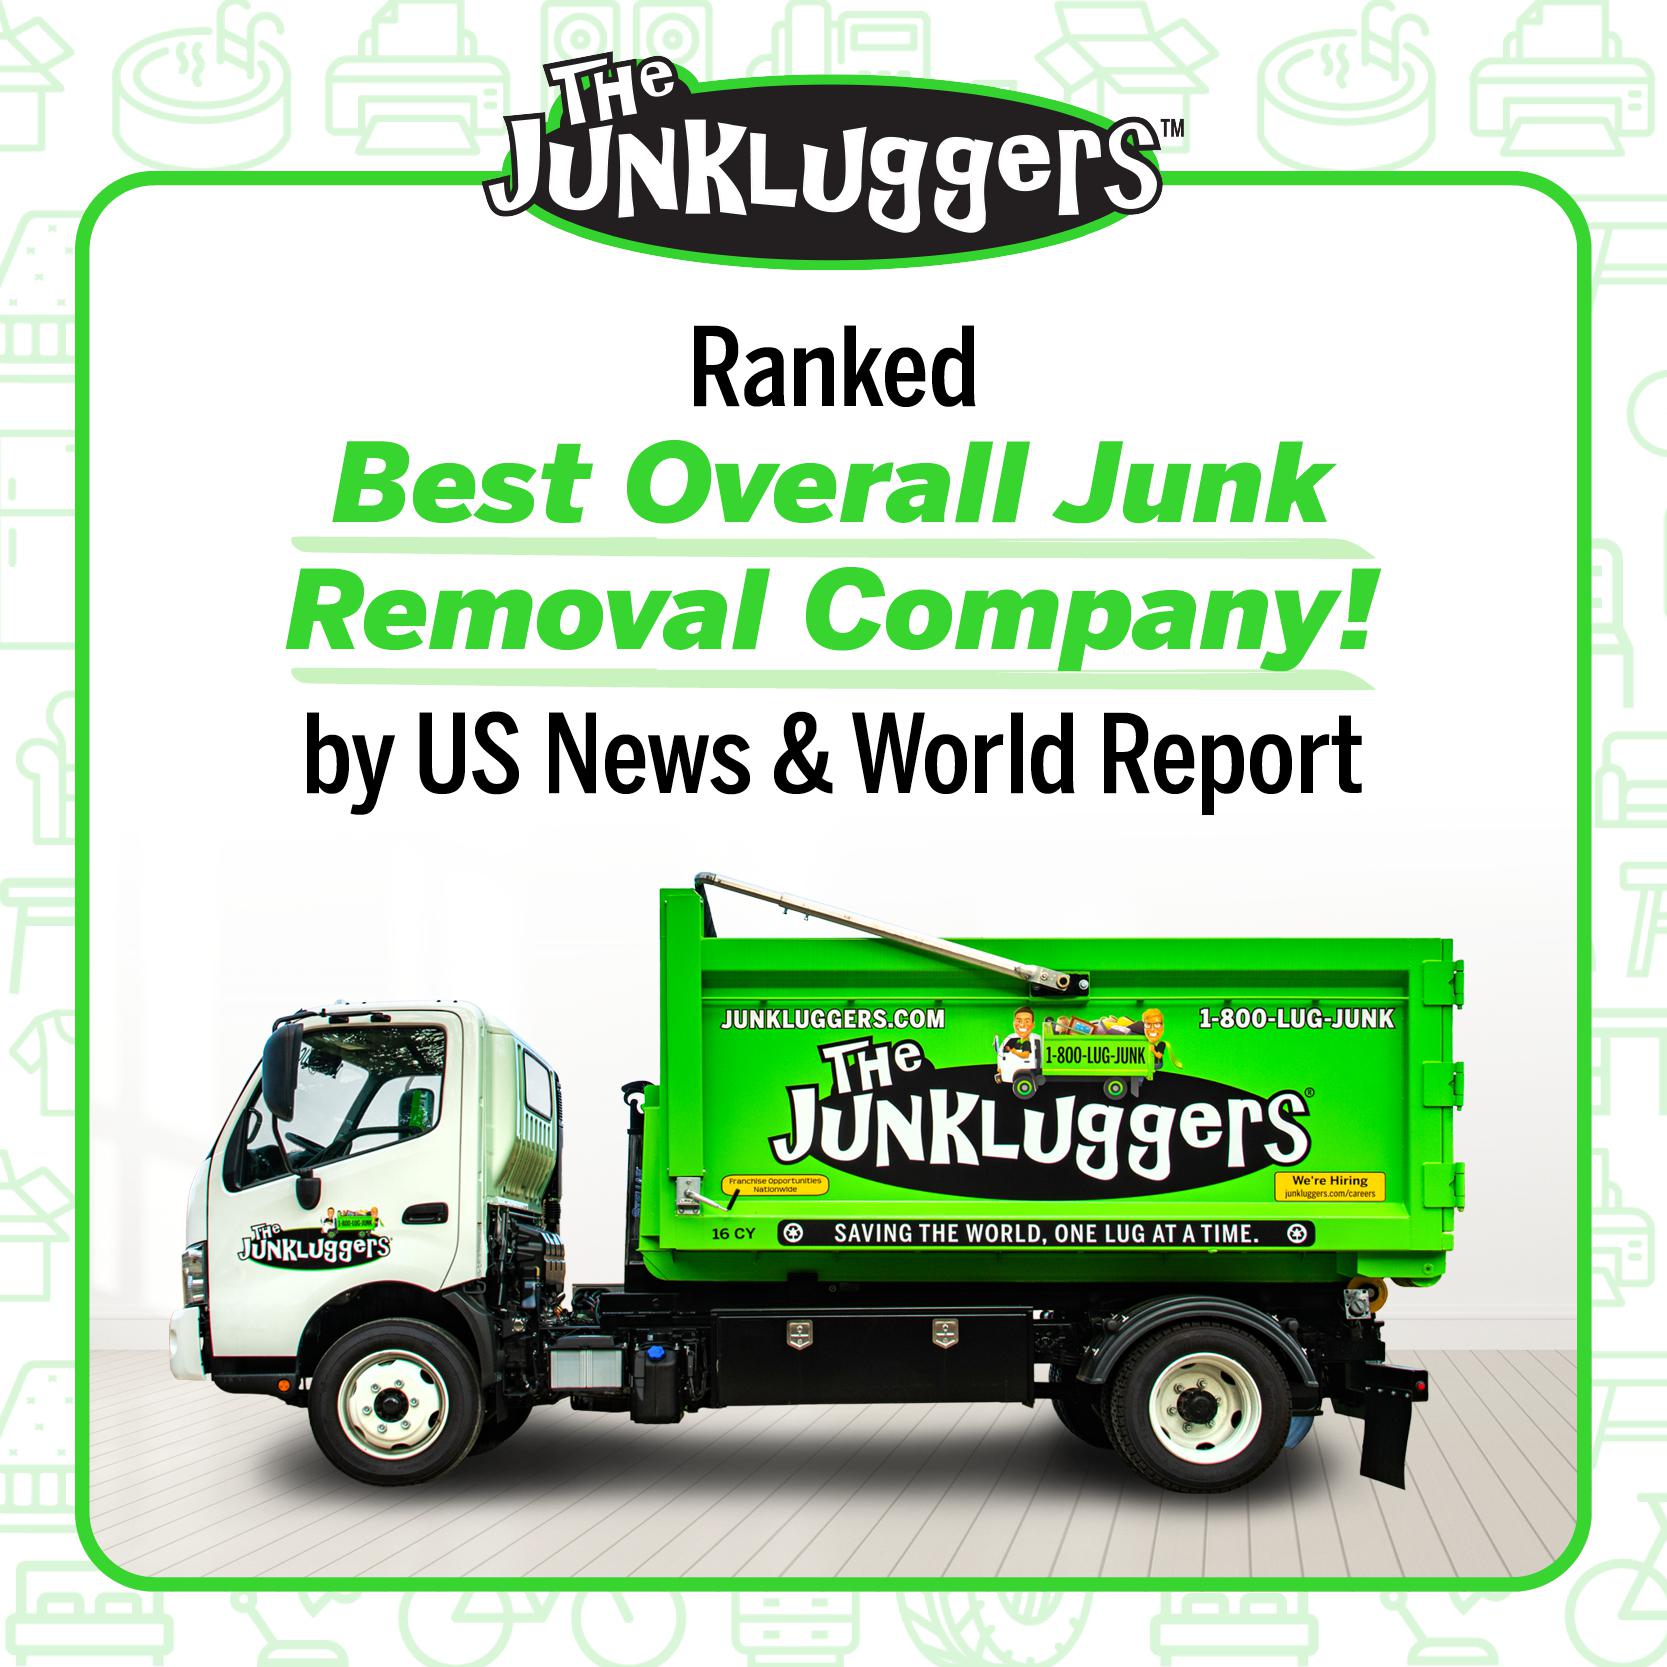 The Junkluggers Named Best Overall Junk Removal Company!